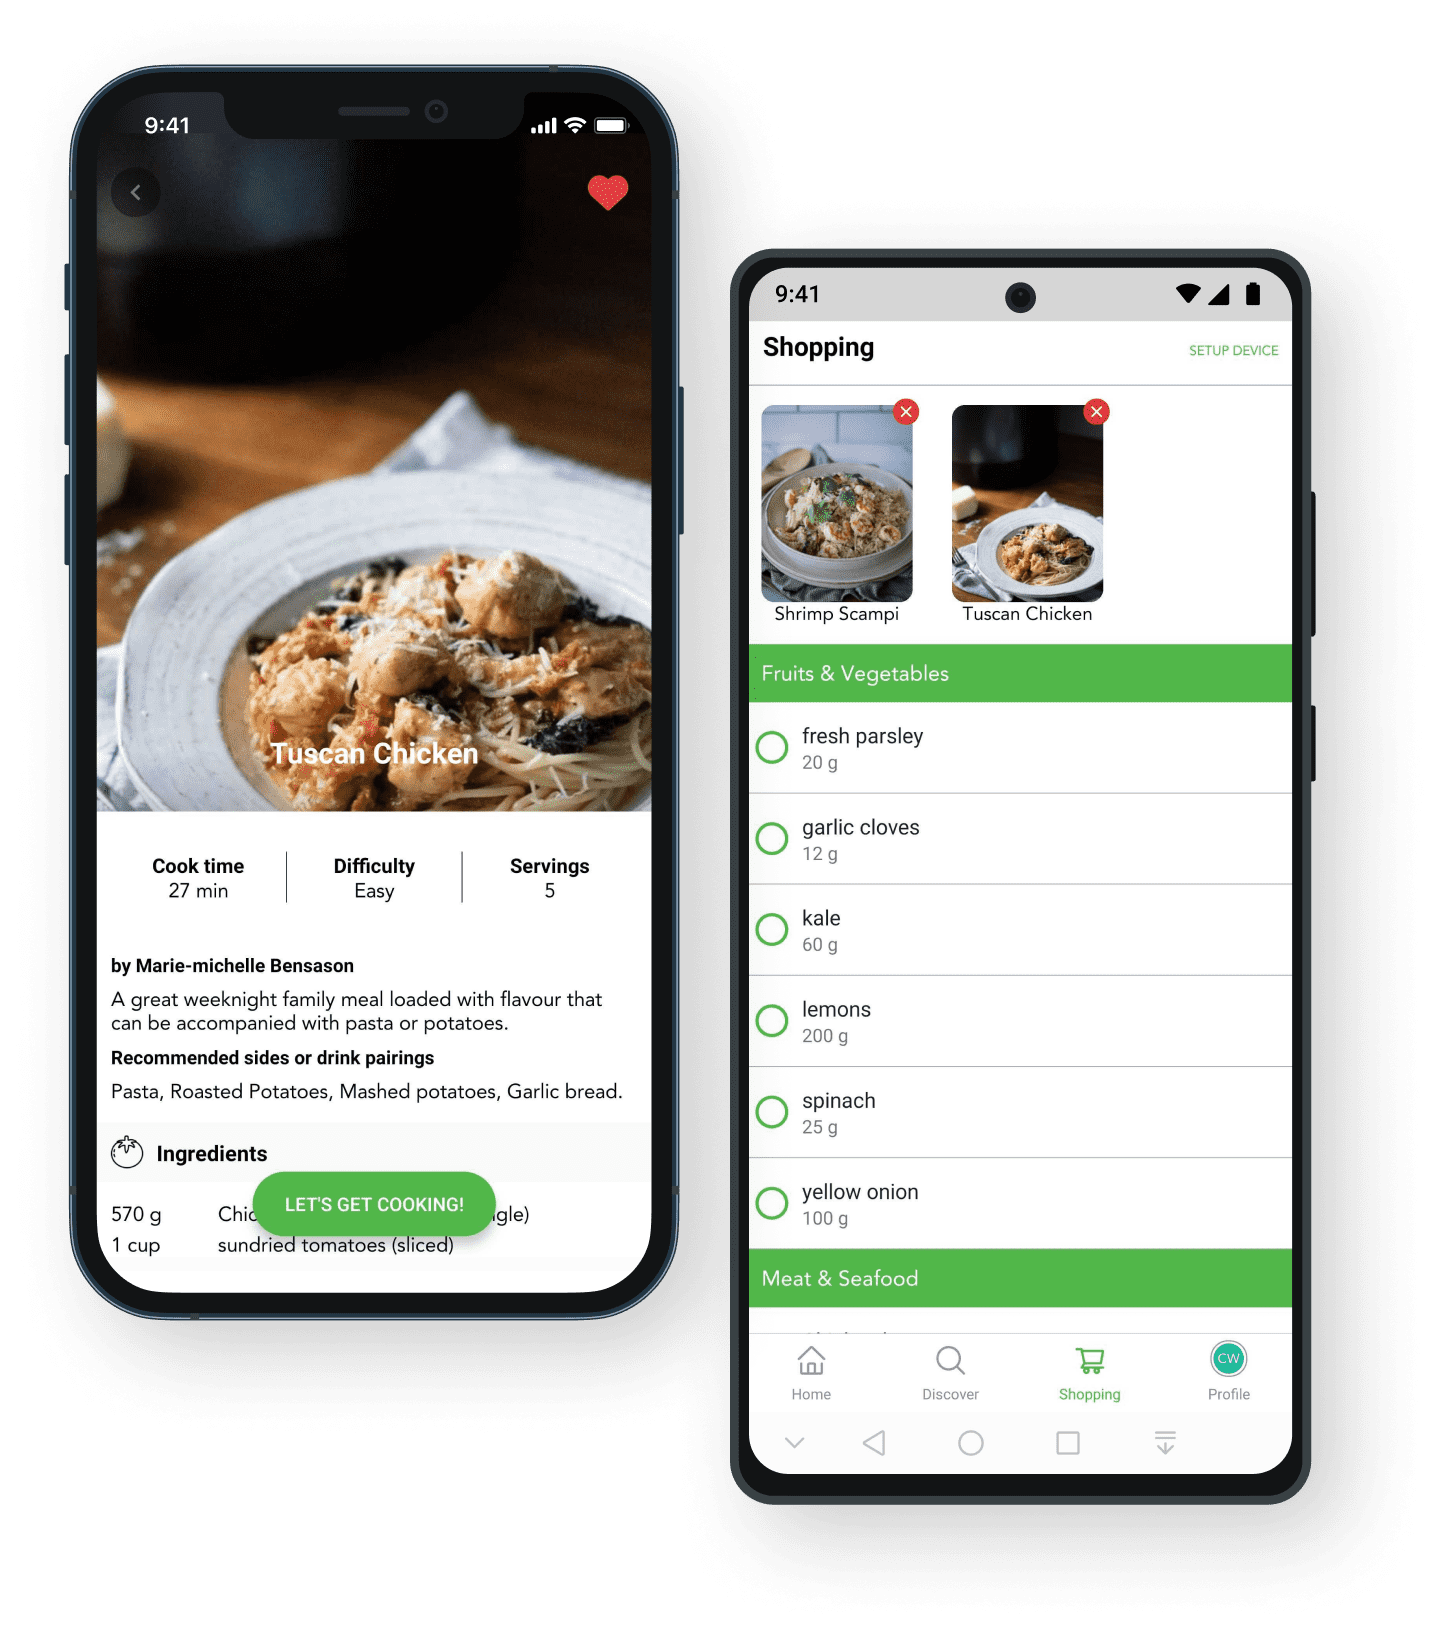 This image is showing two cell phone screens side by side. Showing two different screens of the Oliver app. The device on the left is showing the recipes page for the Tuscan Chicken and the device on the right is showing the shopping list screen. 